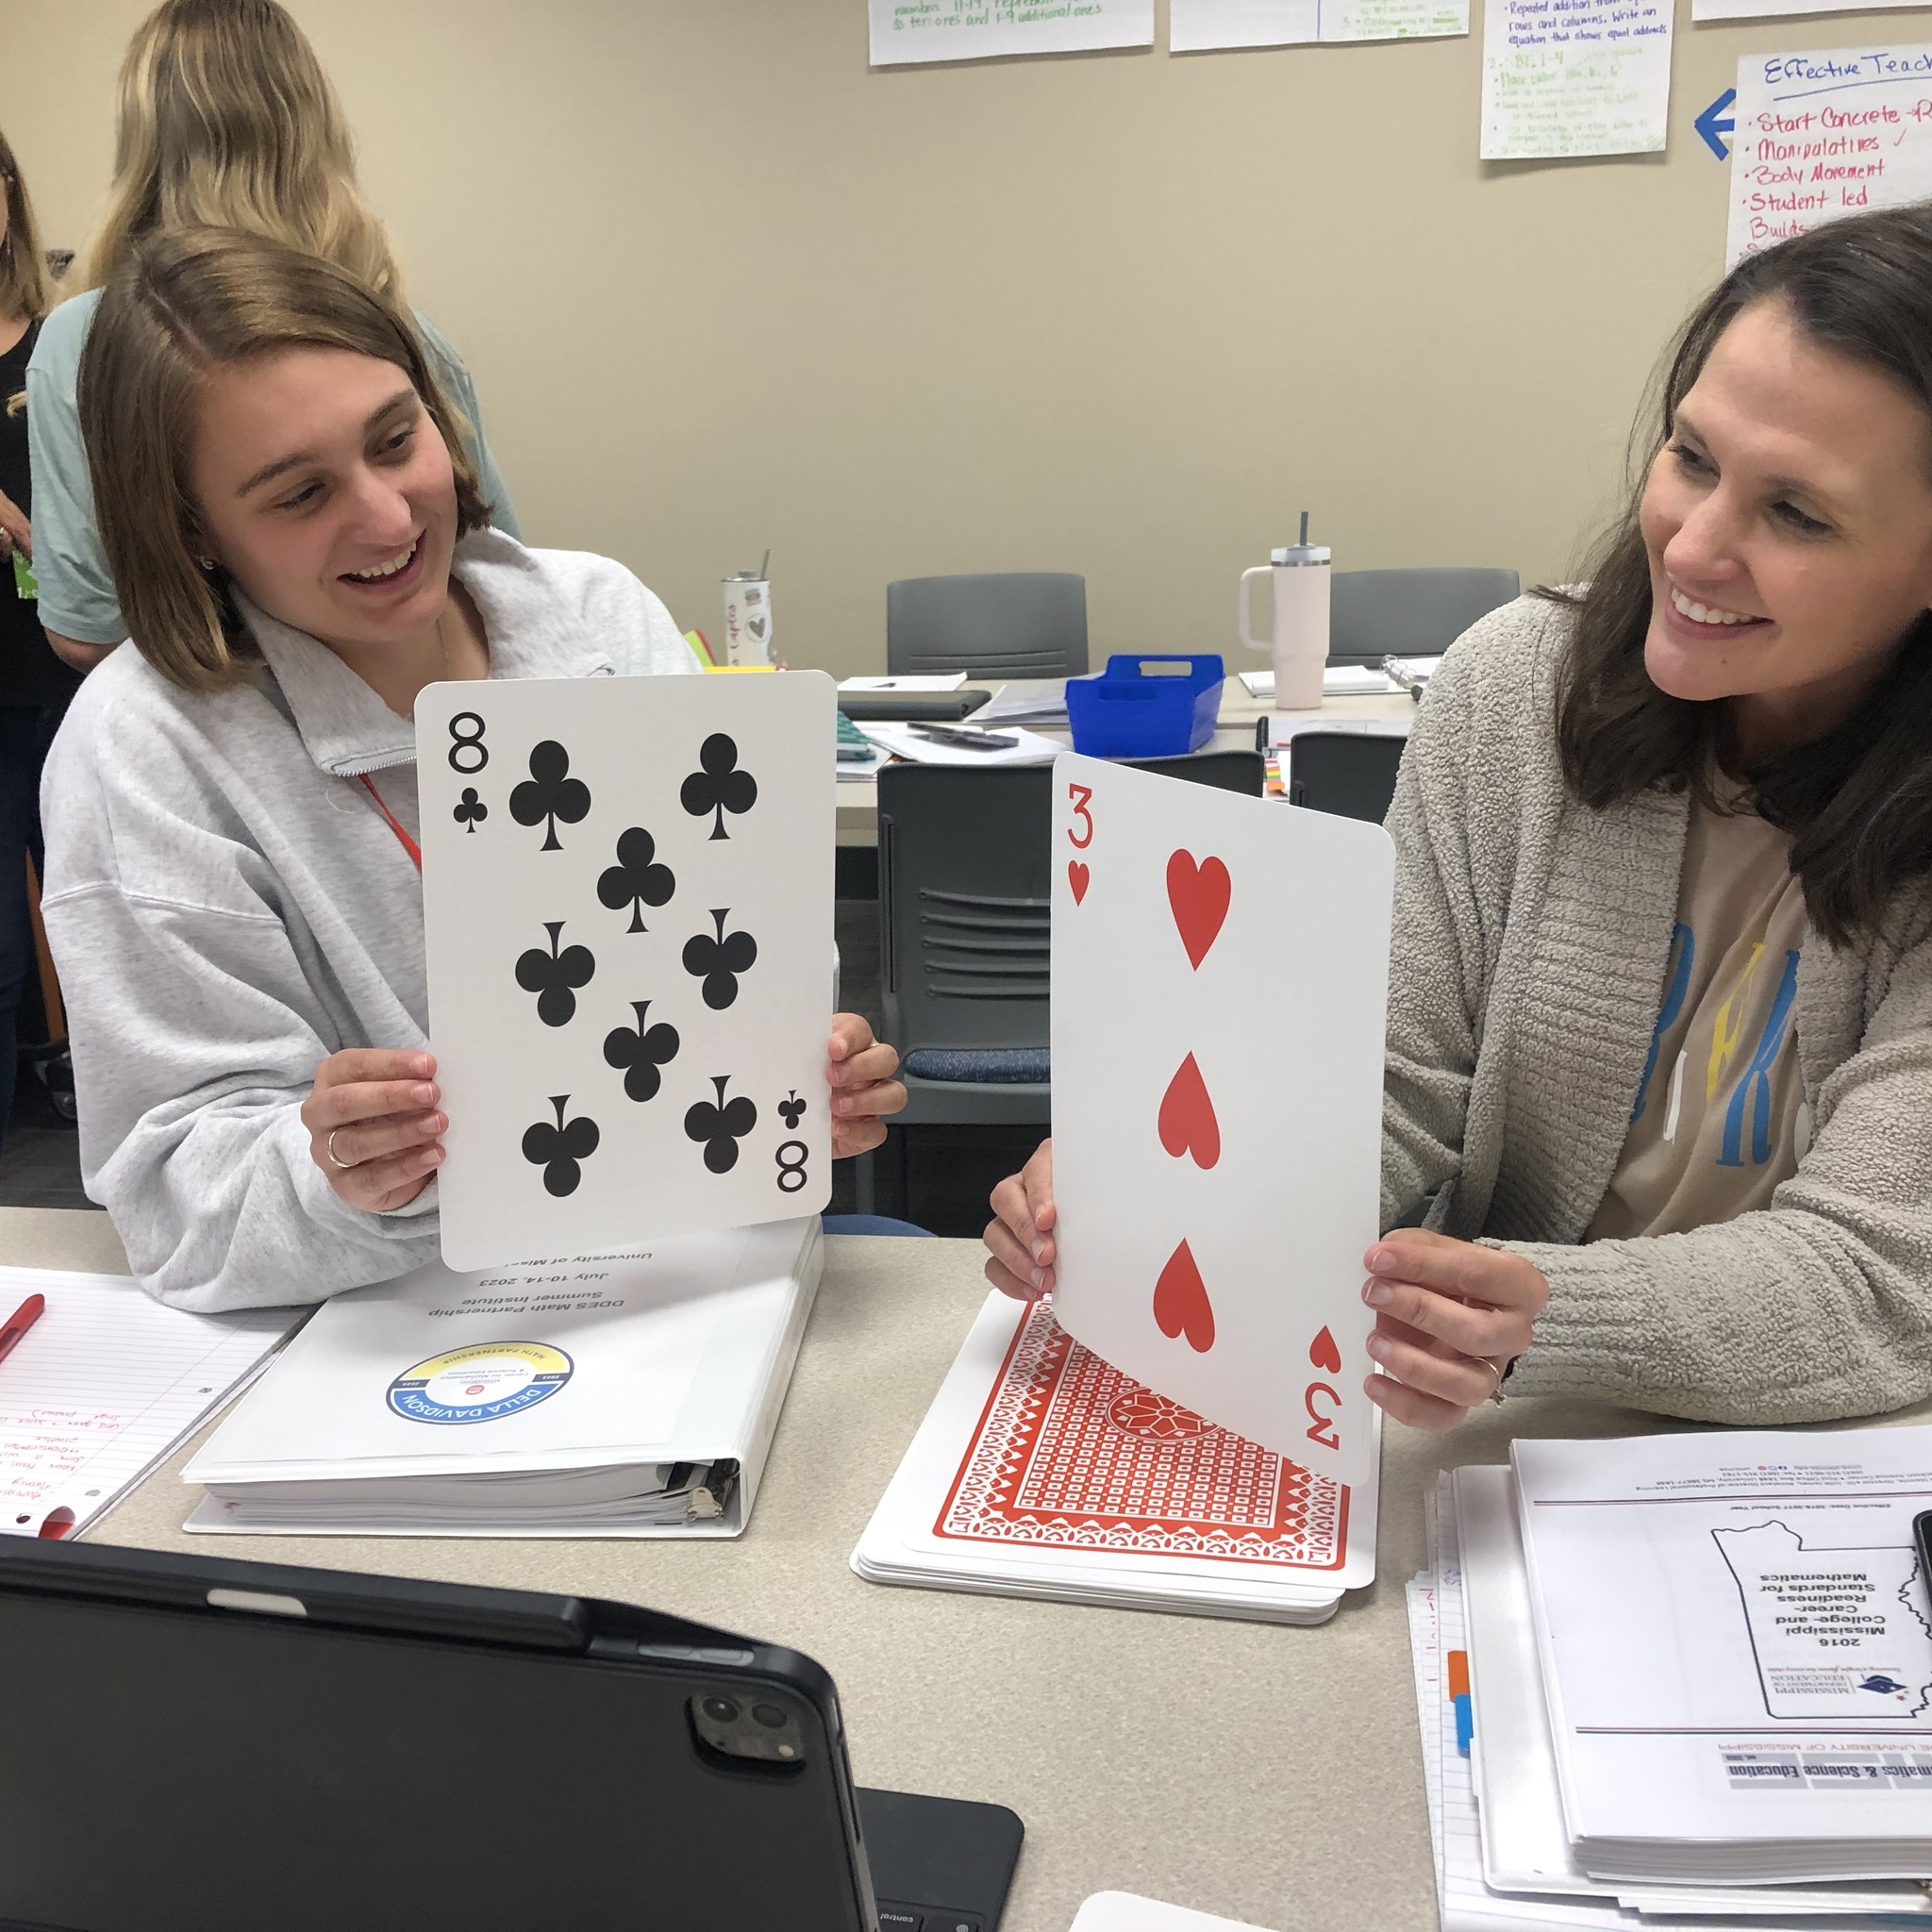 Two teacher hold up large playing cards during a learning activity.